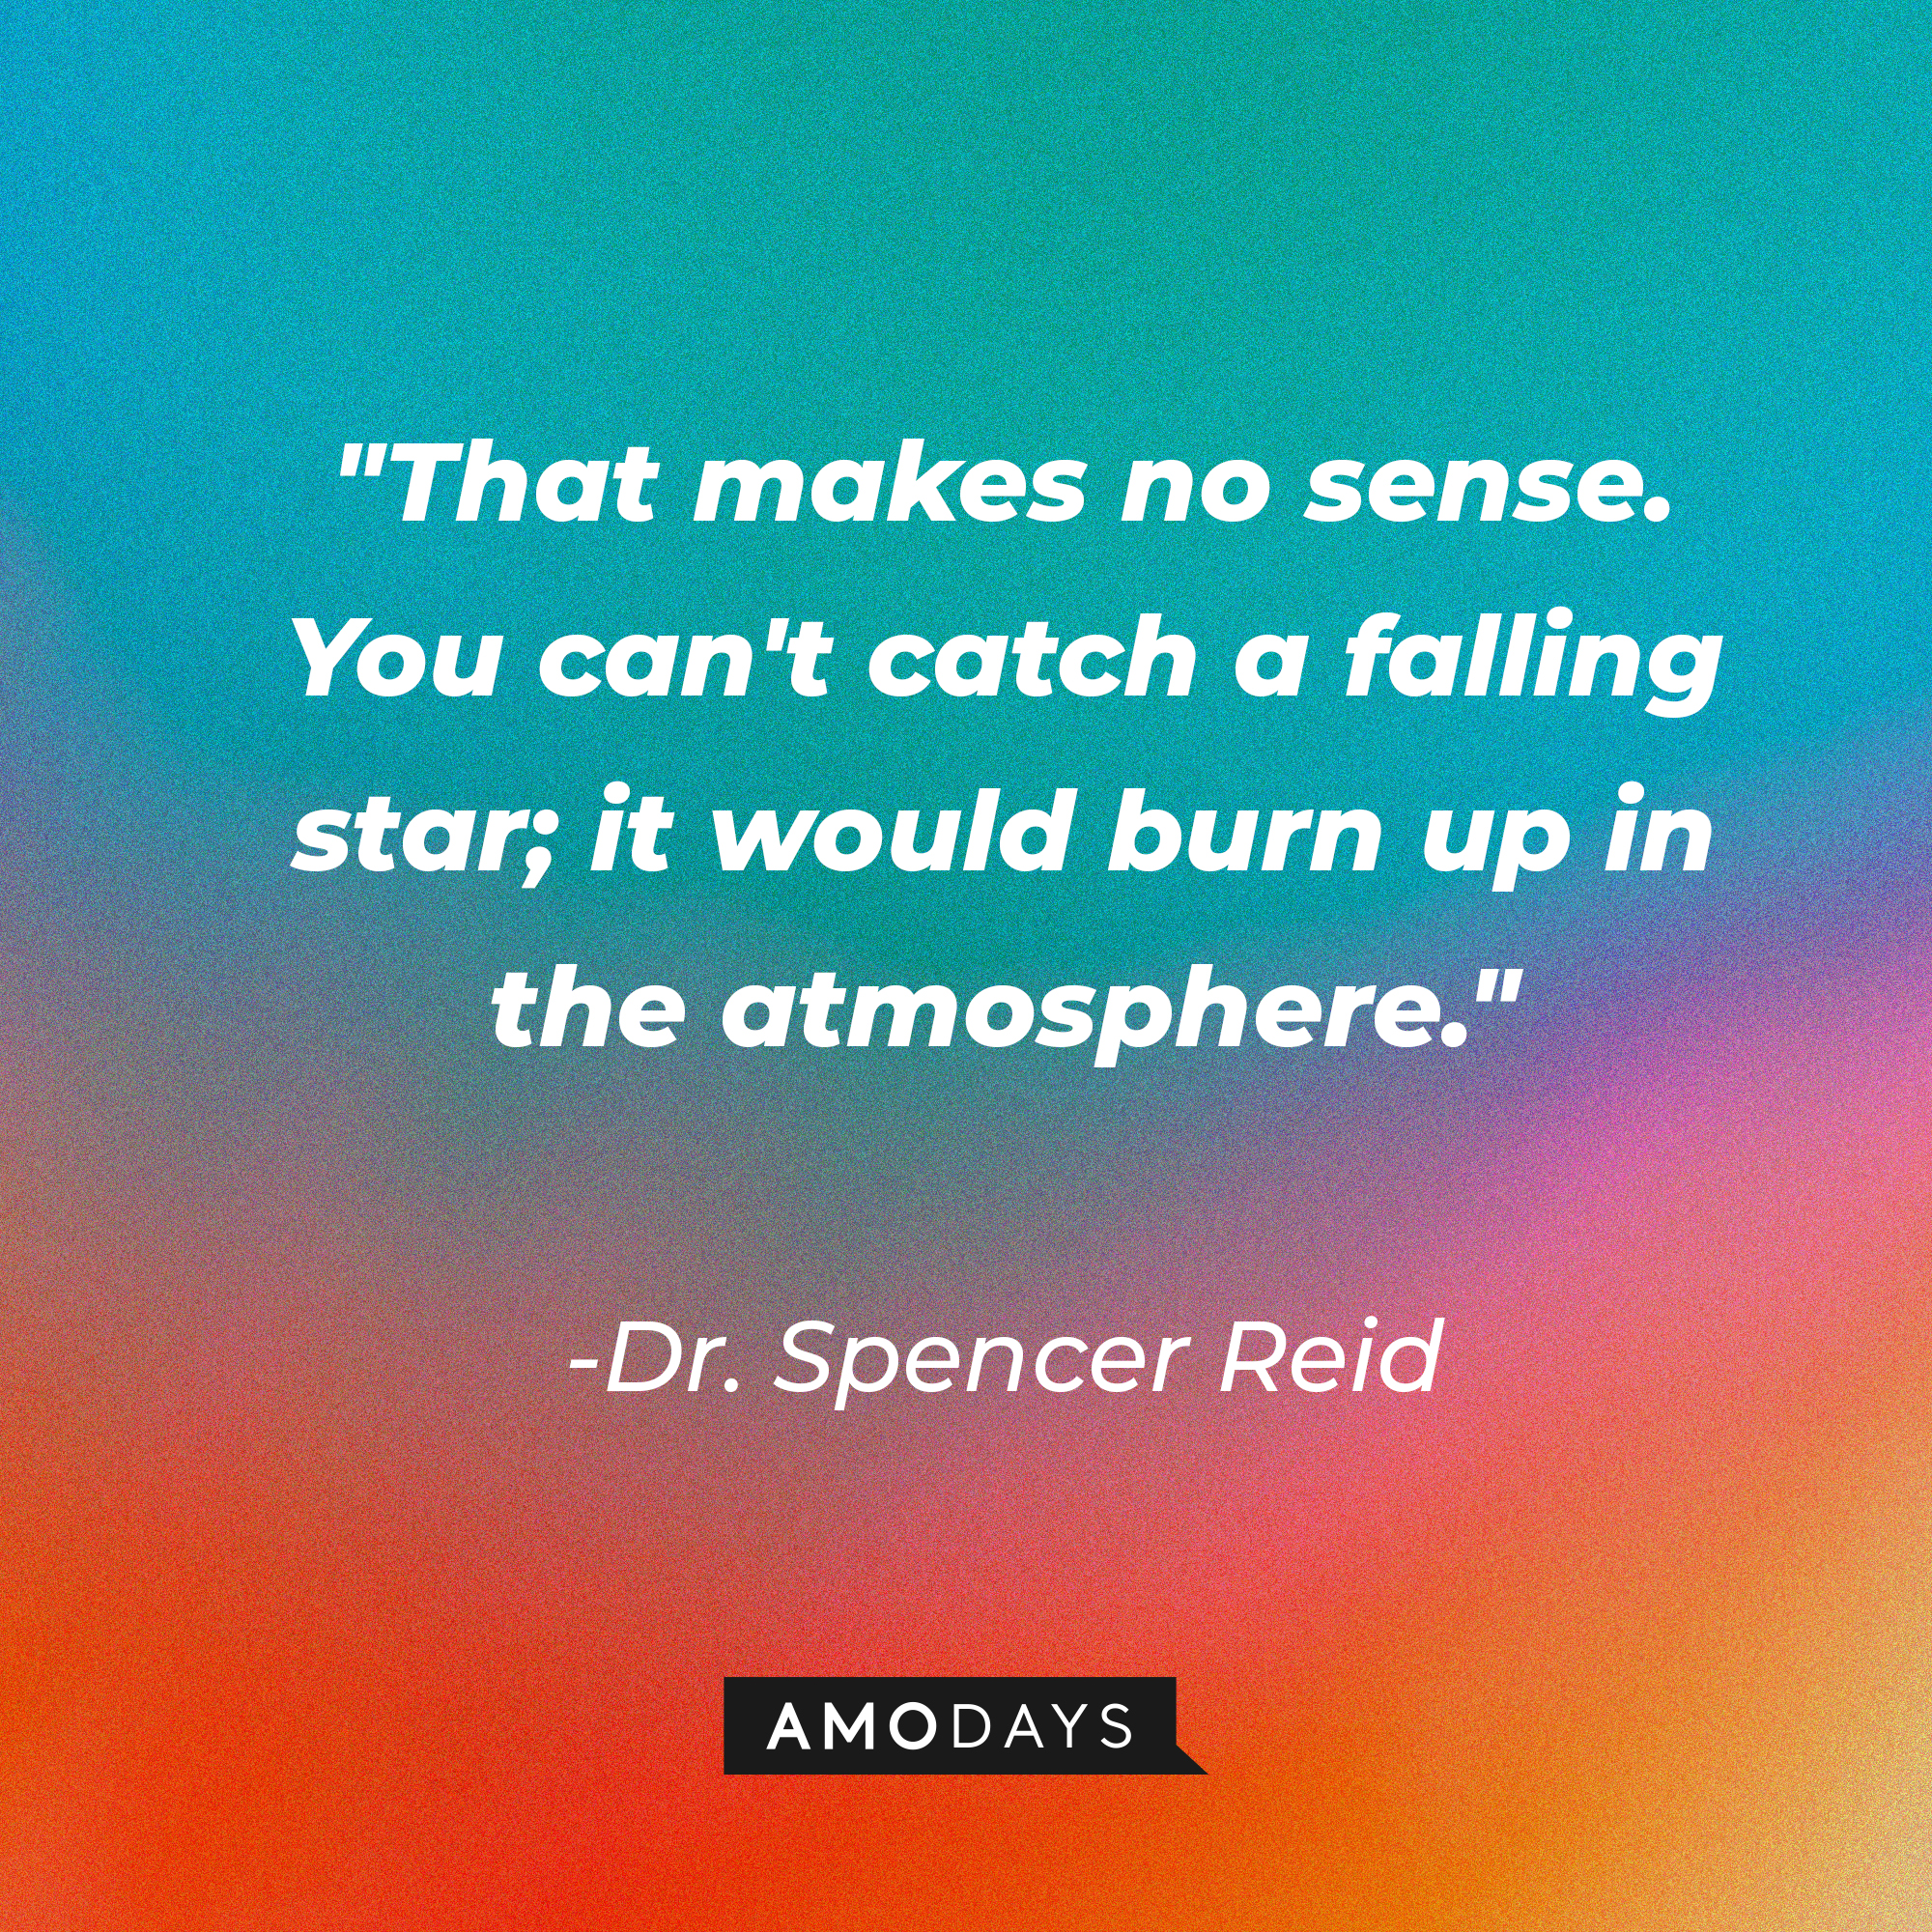 Dr. Spencer Reid's quote: "That makes no sense. You can't catch a falling star; it would burn up in the atmosphere." | Source: AmoDays